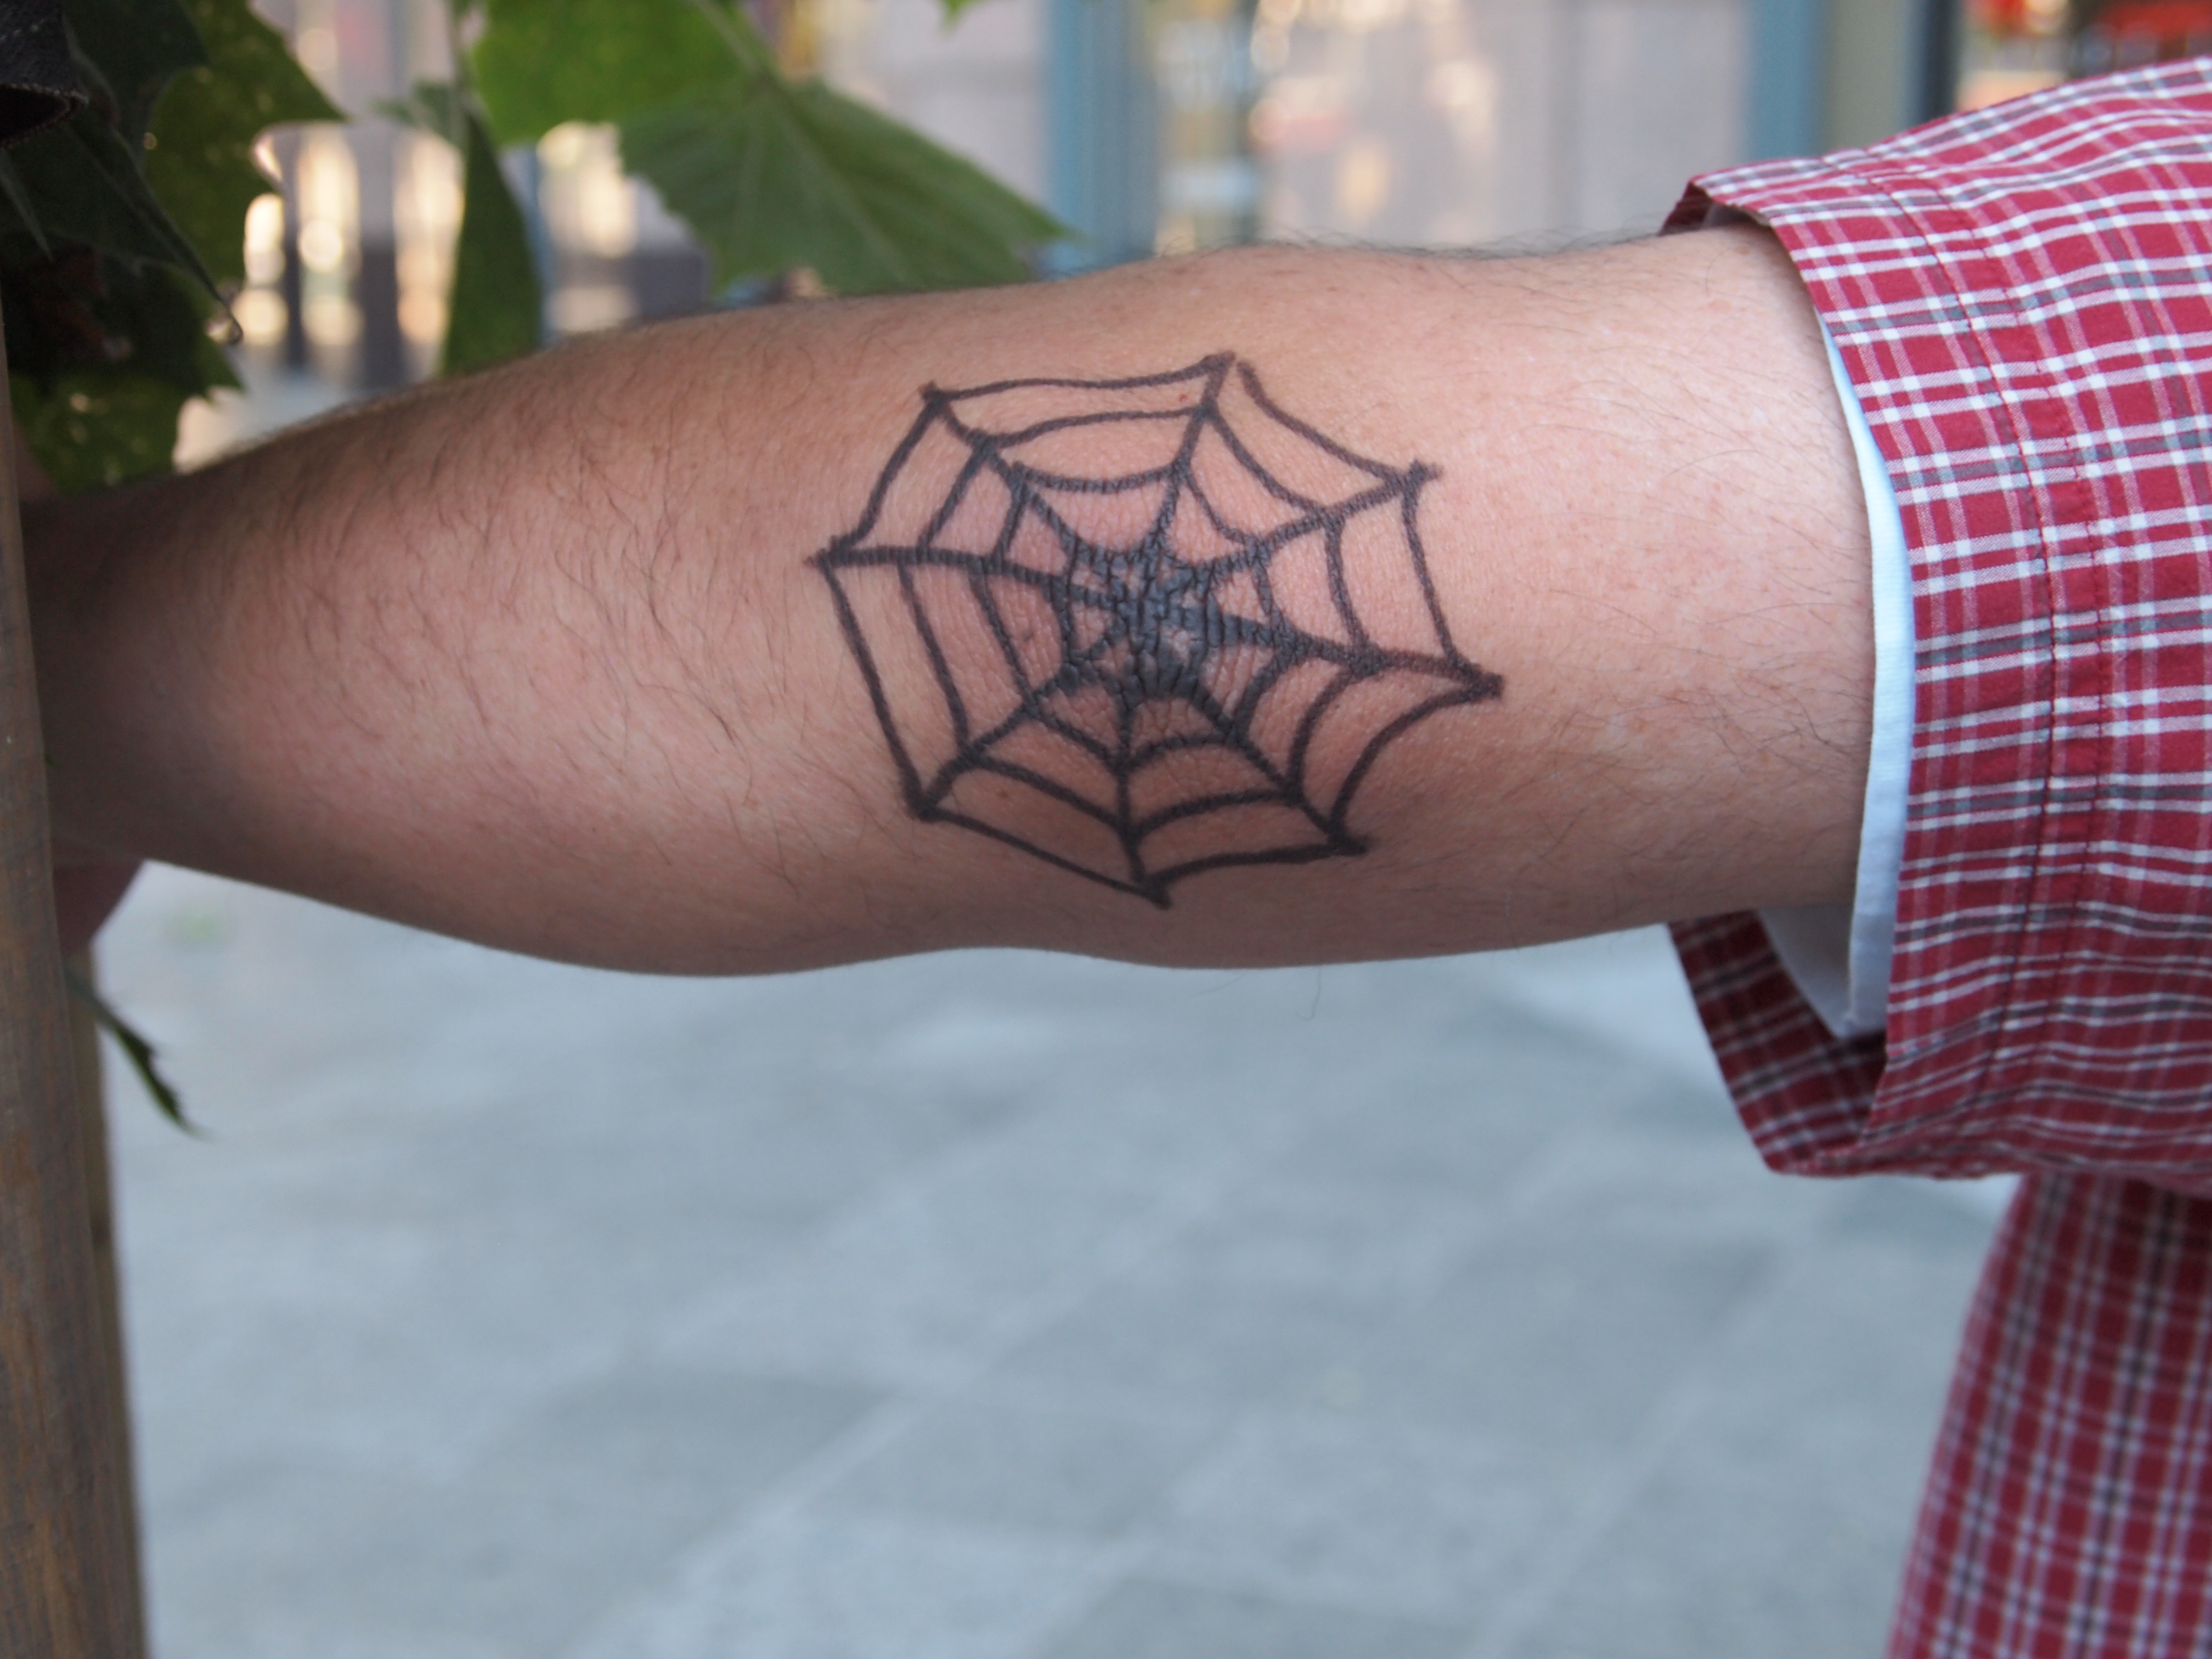 Spider and web tattoo meaning - wide 10